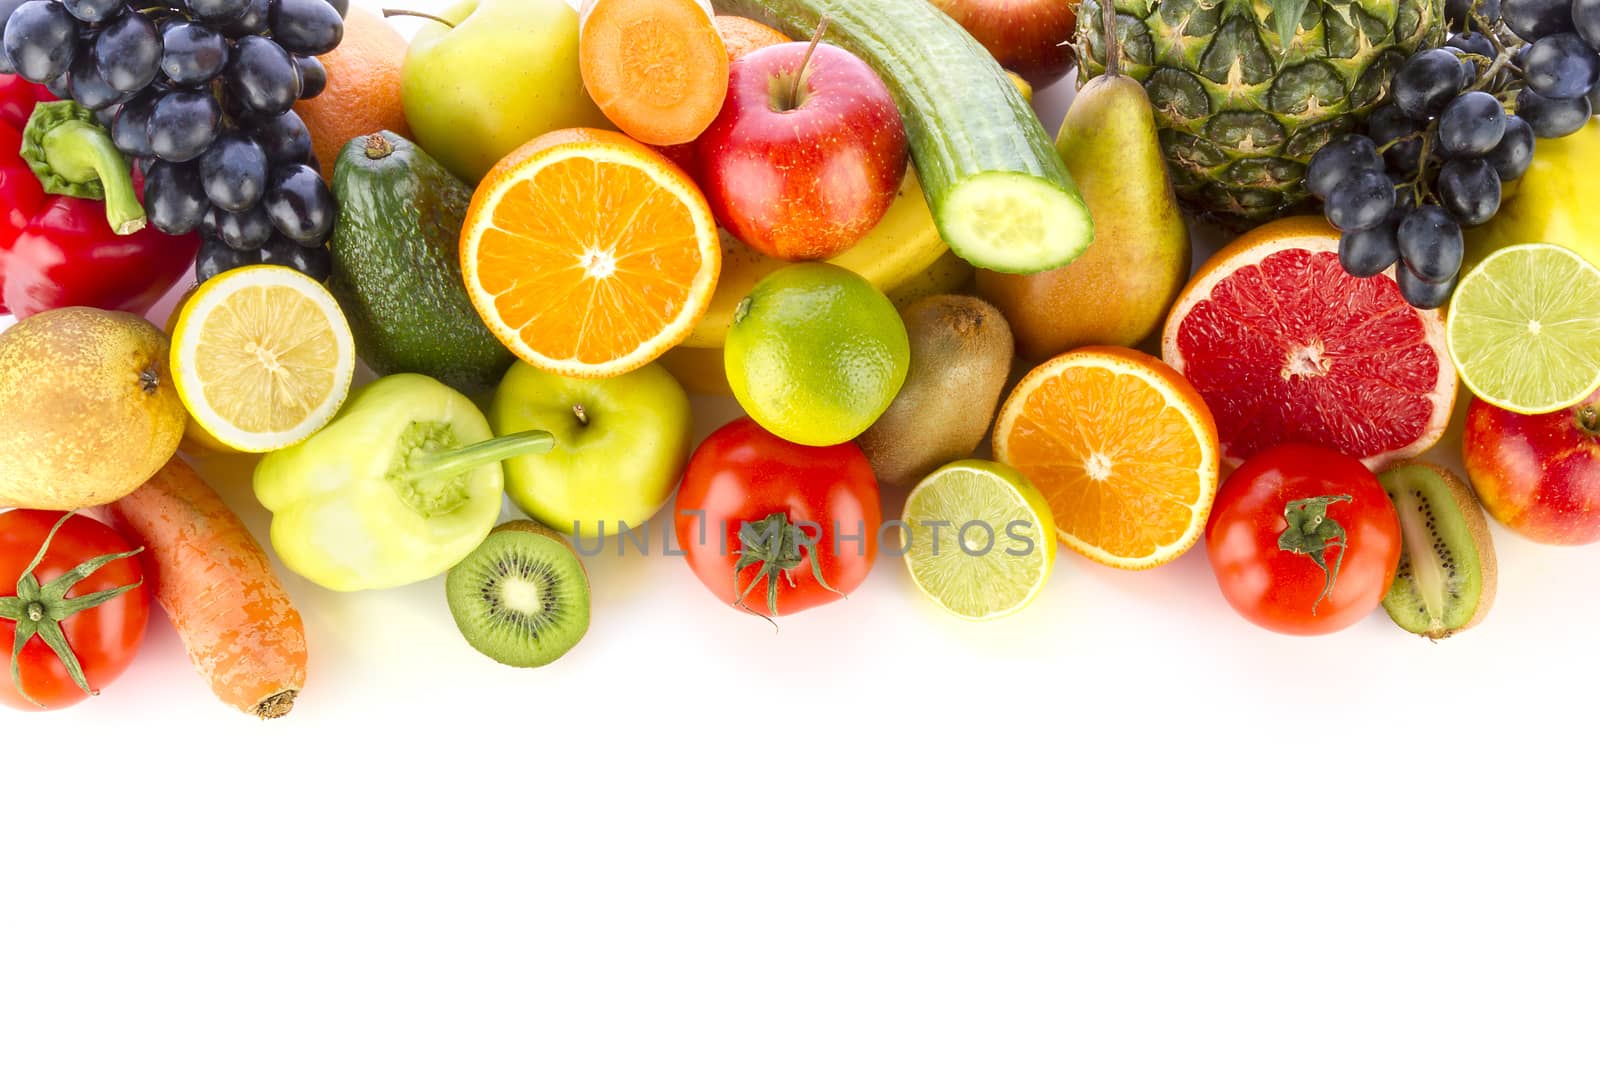 A pile of fresh, healthy fruits and vegetables on white.
